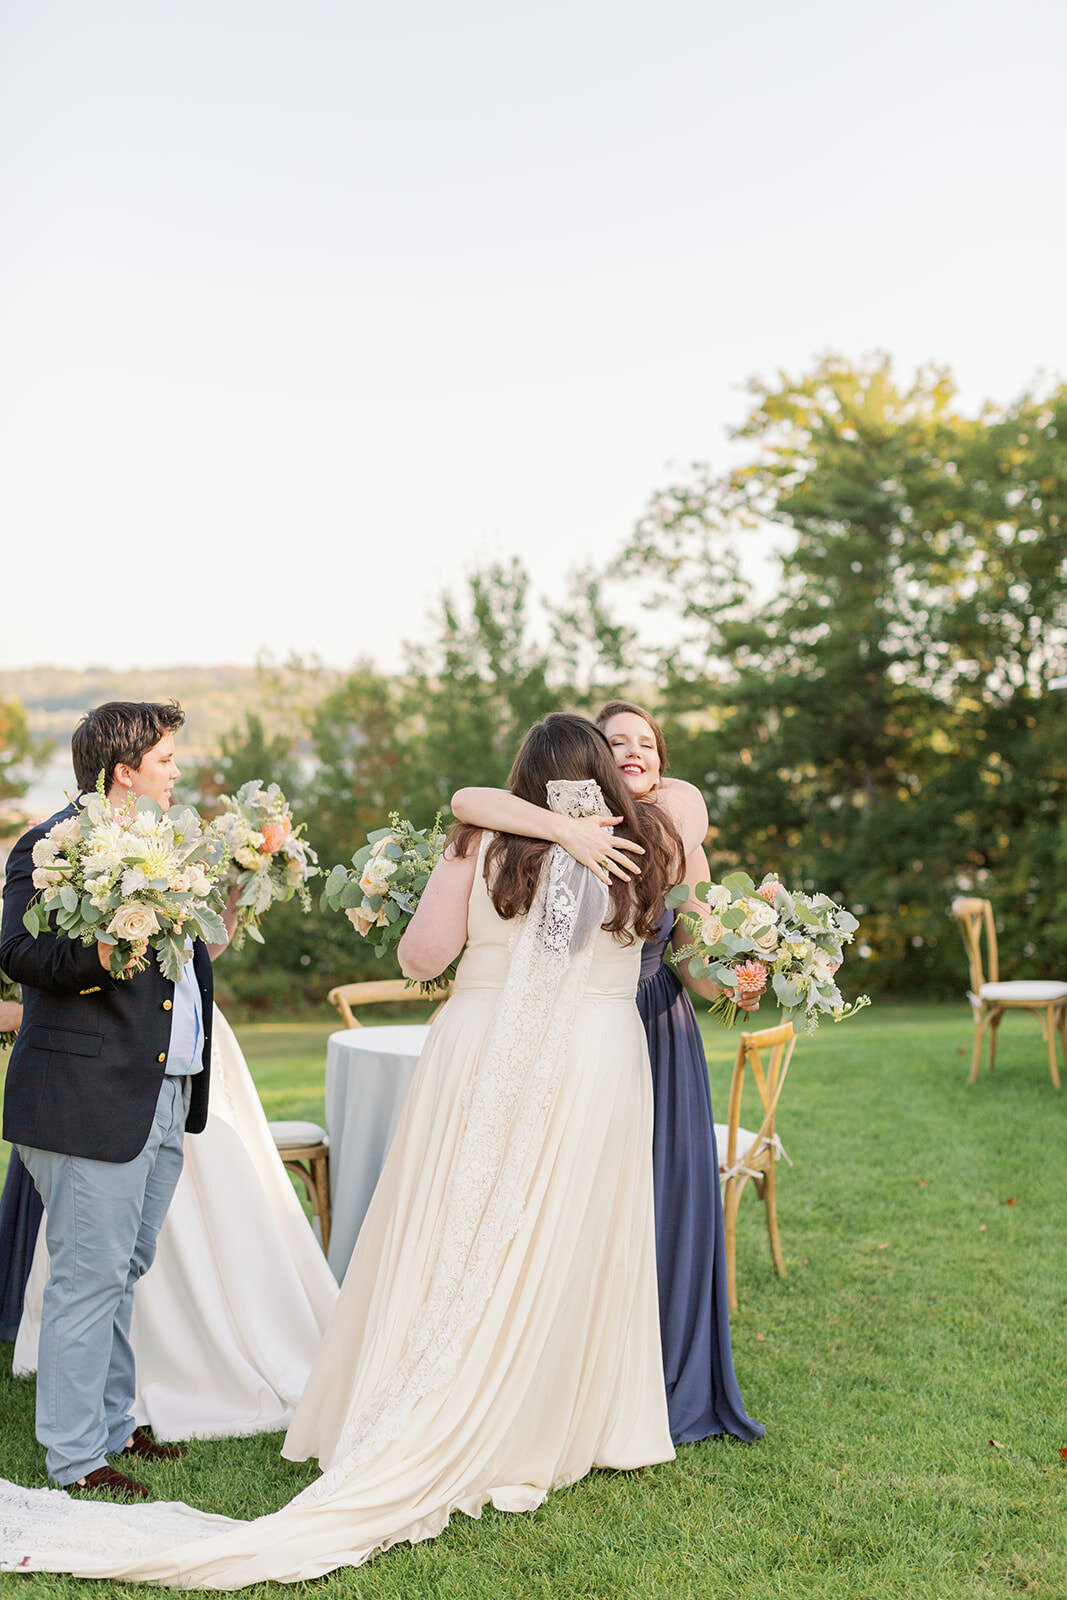 A bride hugging someone as another person stands next to them with a bouquet of flowers.